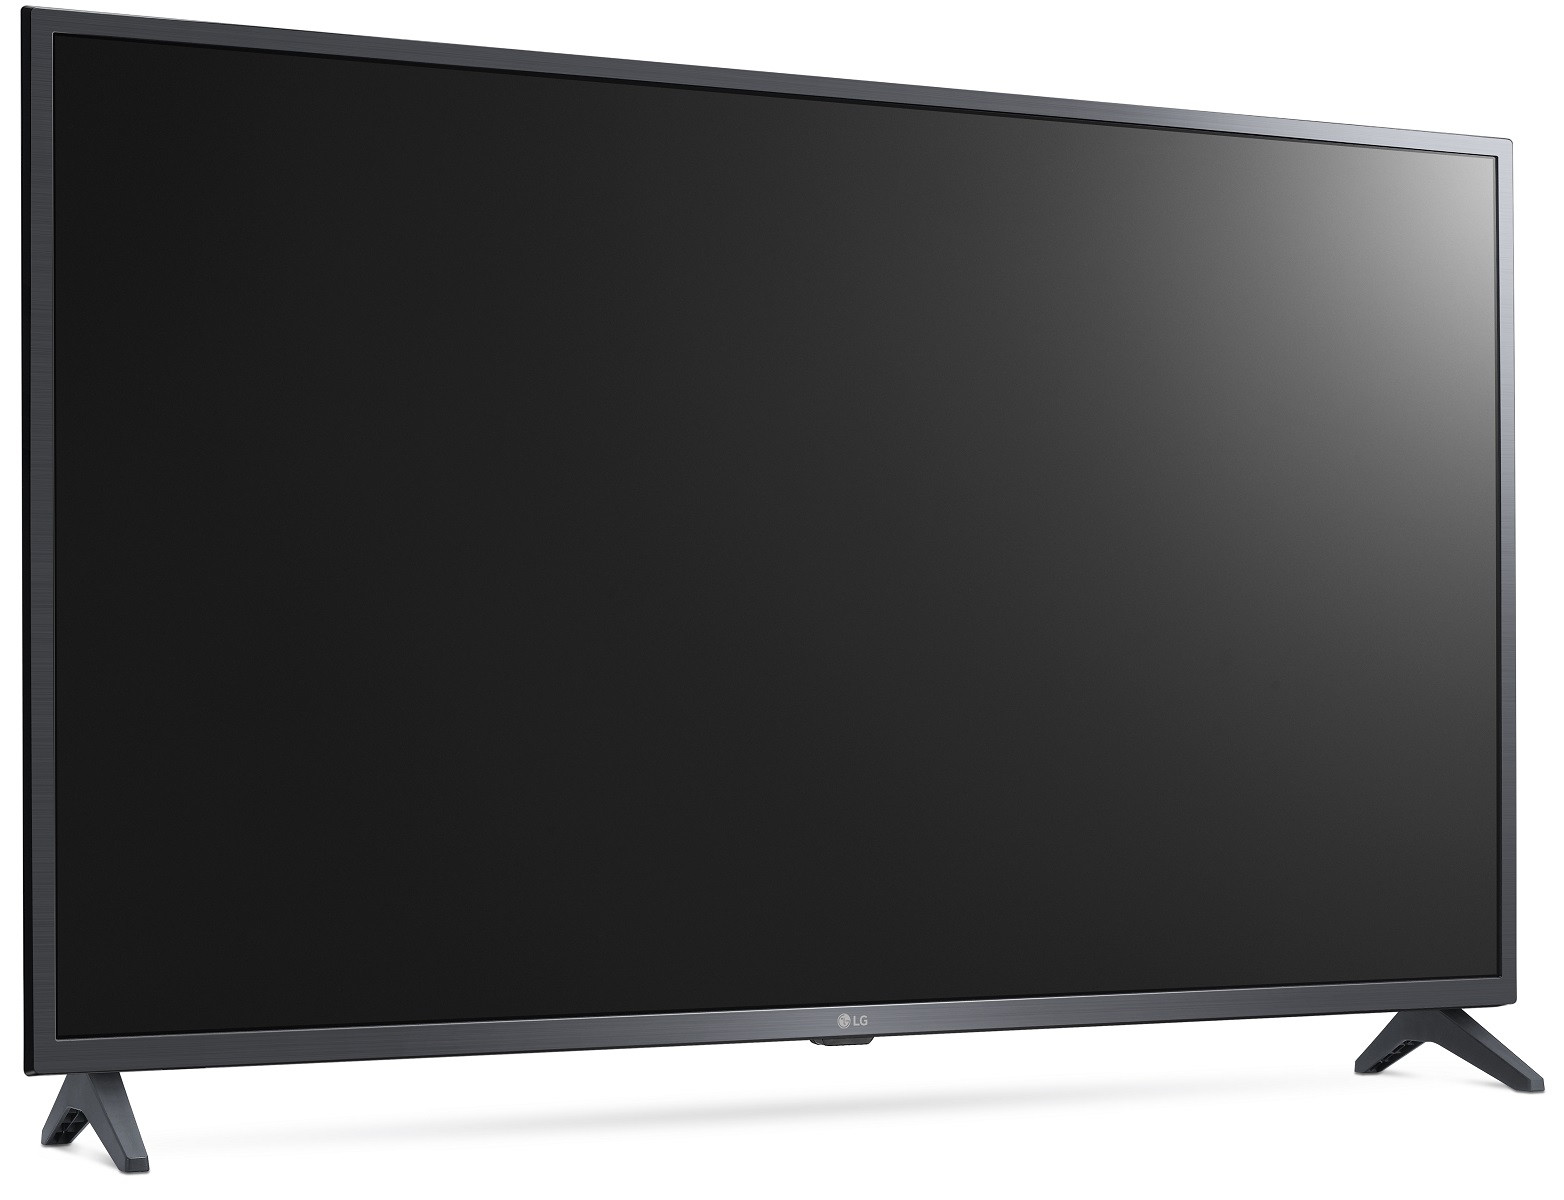 LG 65 Inch 4K UHD Smart LED TV with Built-in Receiver - 65UP7550PVG